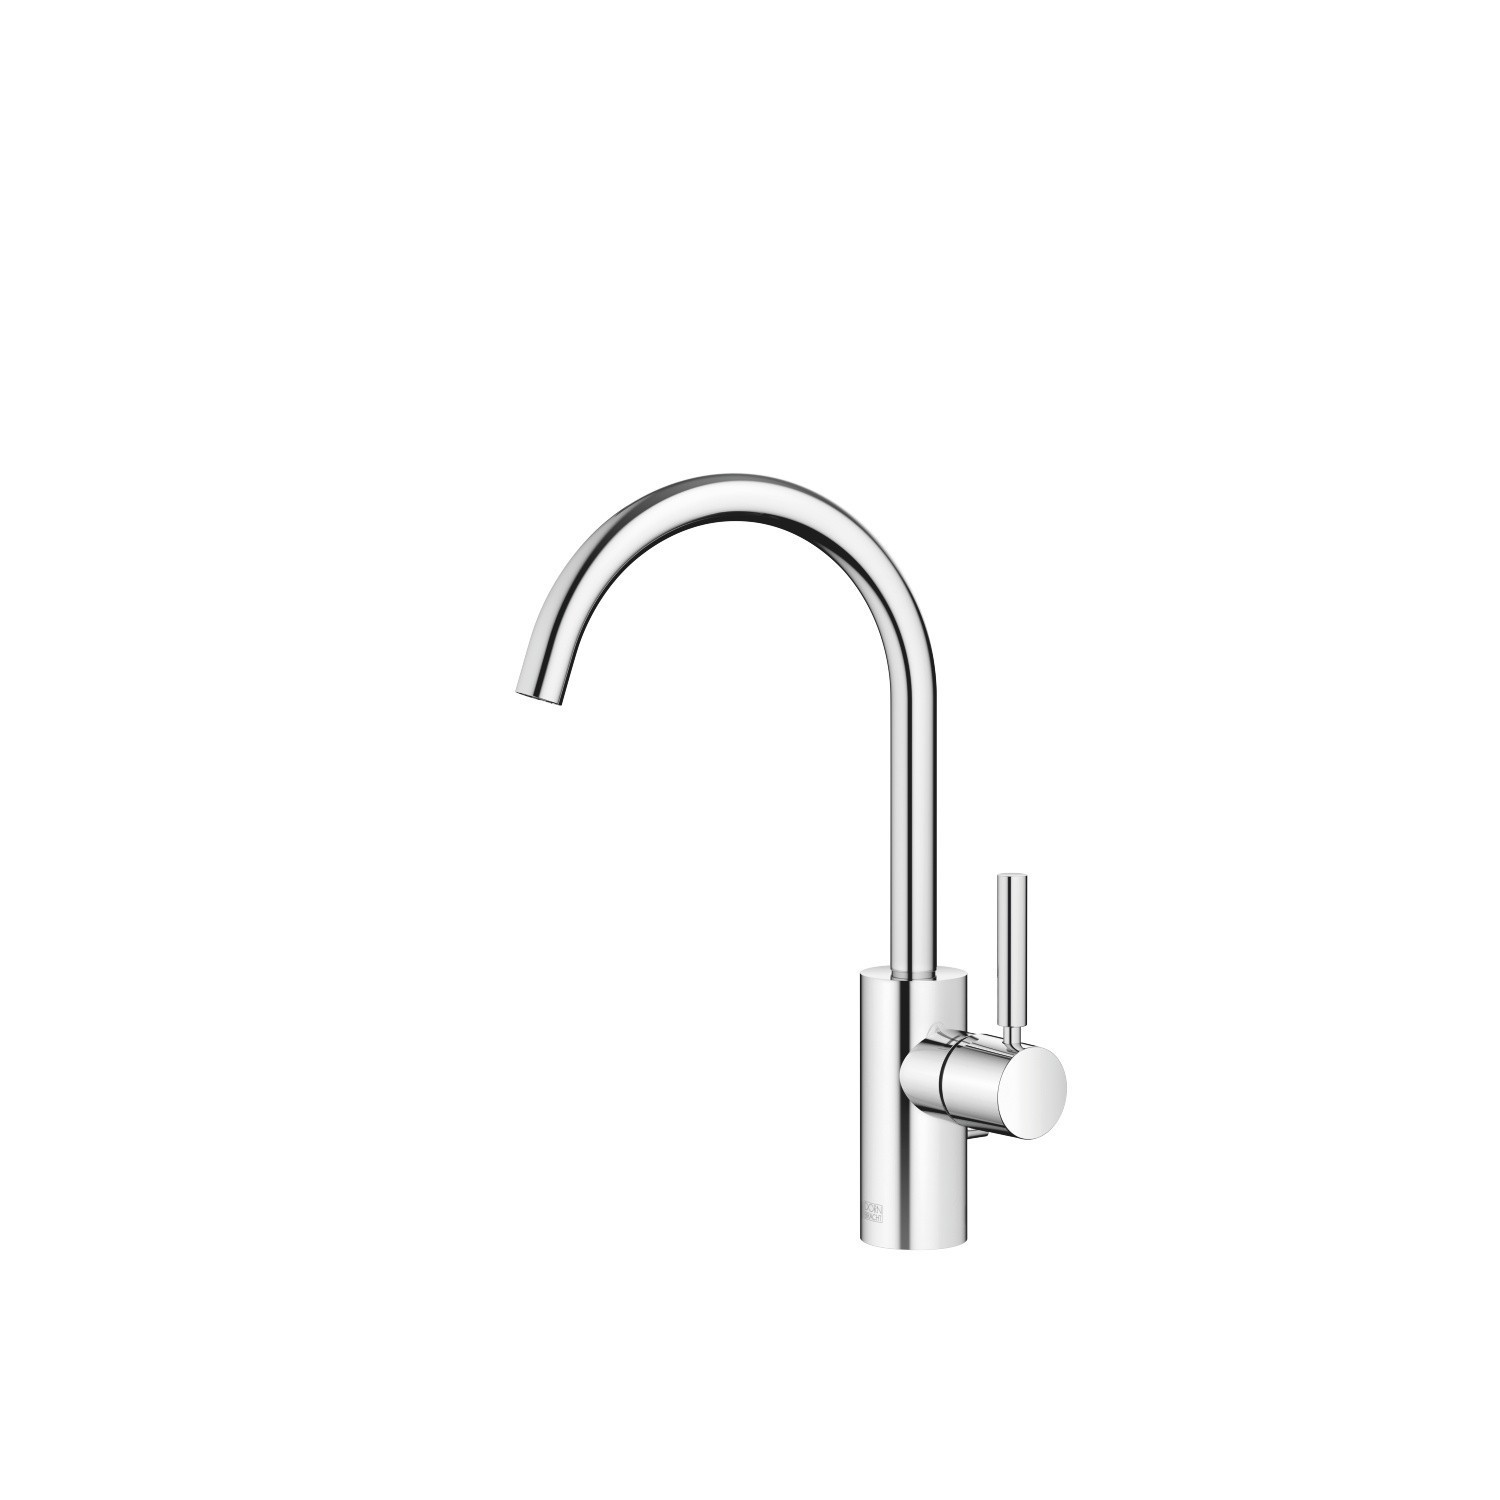 DORNBRACHT 33500661-0010 META 12 1/4 INCH SINGLE HOLE DECK MOUNT LAVATORY MIXER WITH DRAIN AND LEVER HANDLE